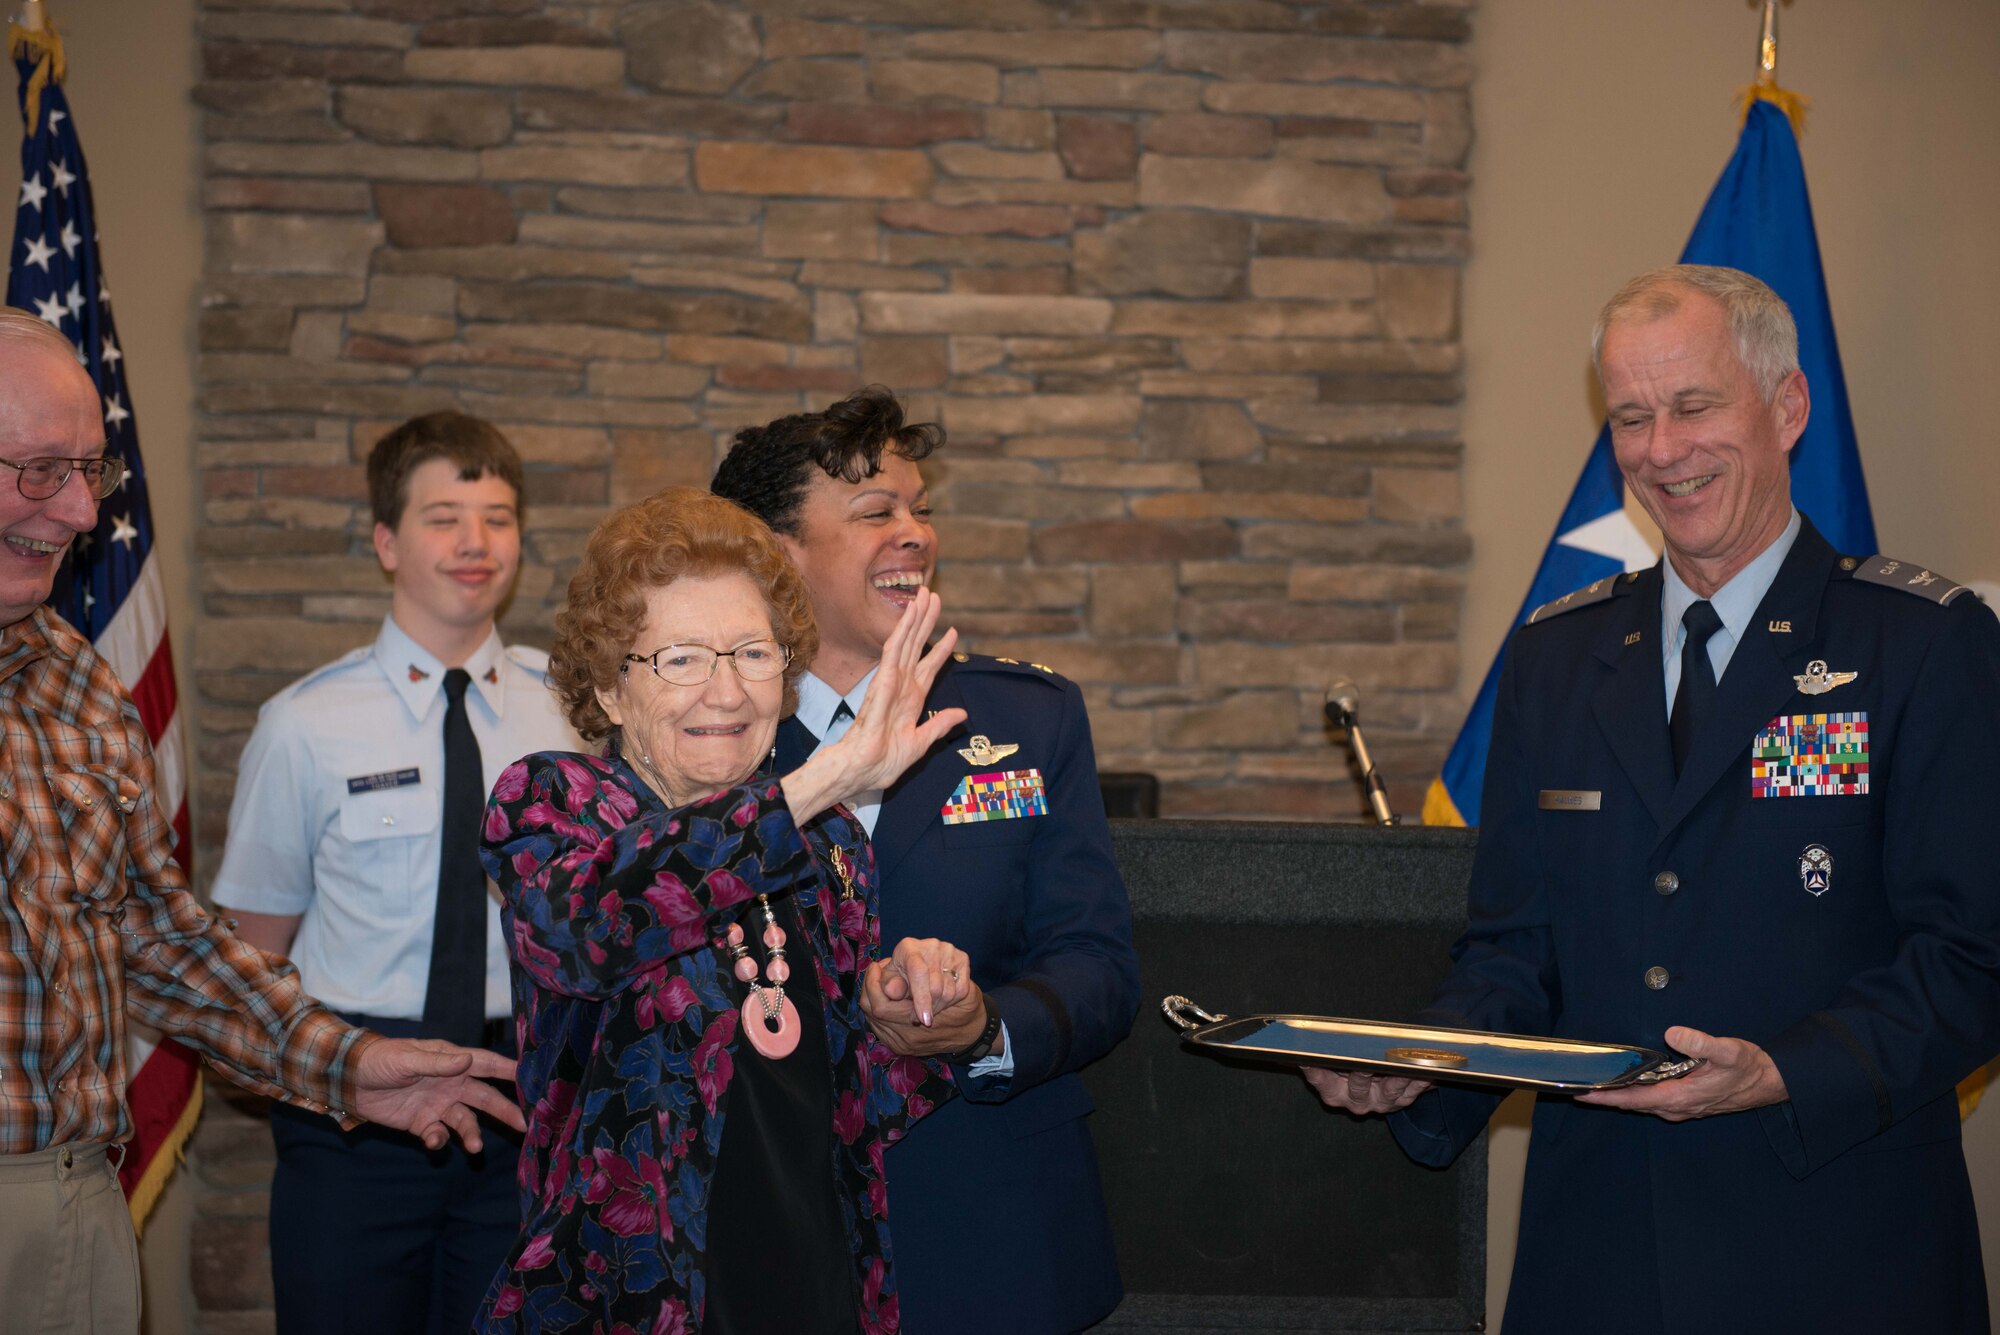 Ms. Cecelia Bell waves during the Congressional Gold Medal ceremony in Faribault, Minn. on Jan. 7. Ms. Bell was presented with the Congressional Gold Medal by Maj. Gen. Stayce Harris, 22nd Air Force commander (center/right), for her service in the Civil Air Patrol during World War II. (U.S. Air Force photo by Capt. William-Joseph Mojica)
